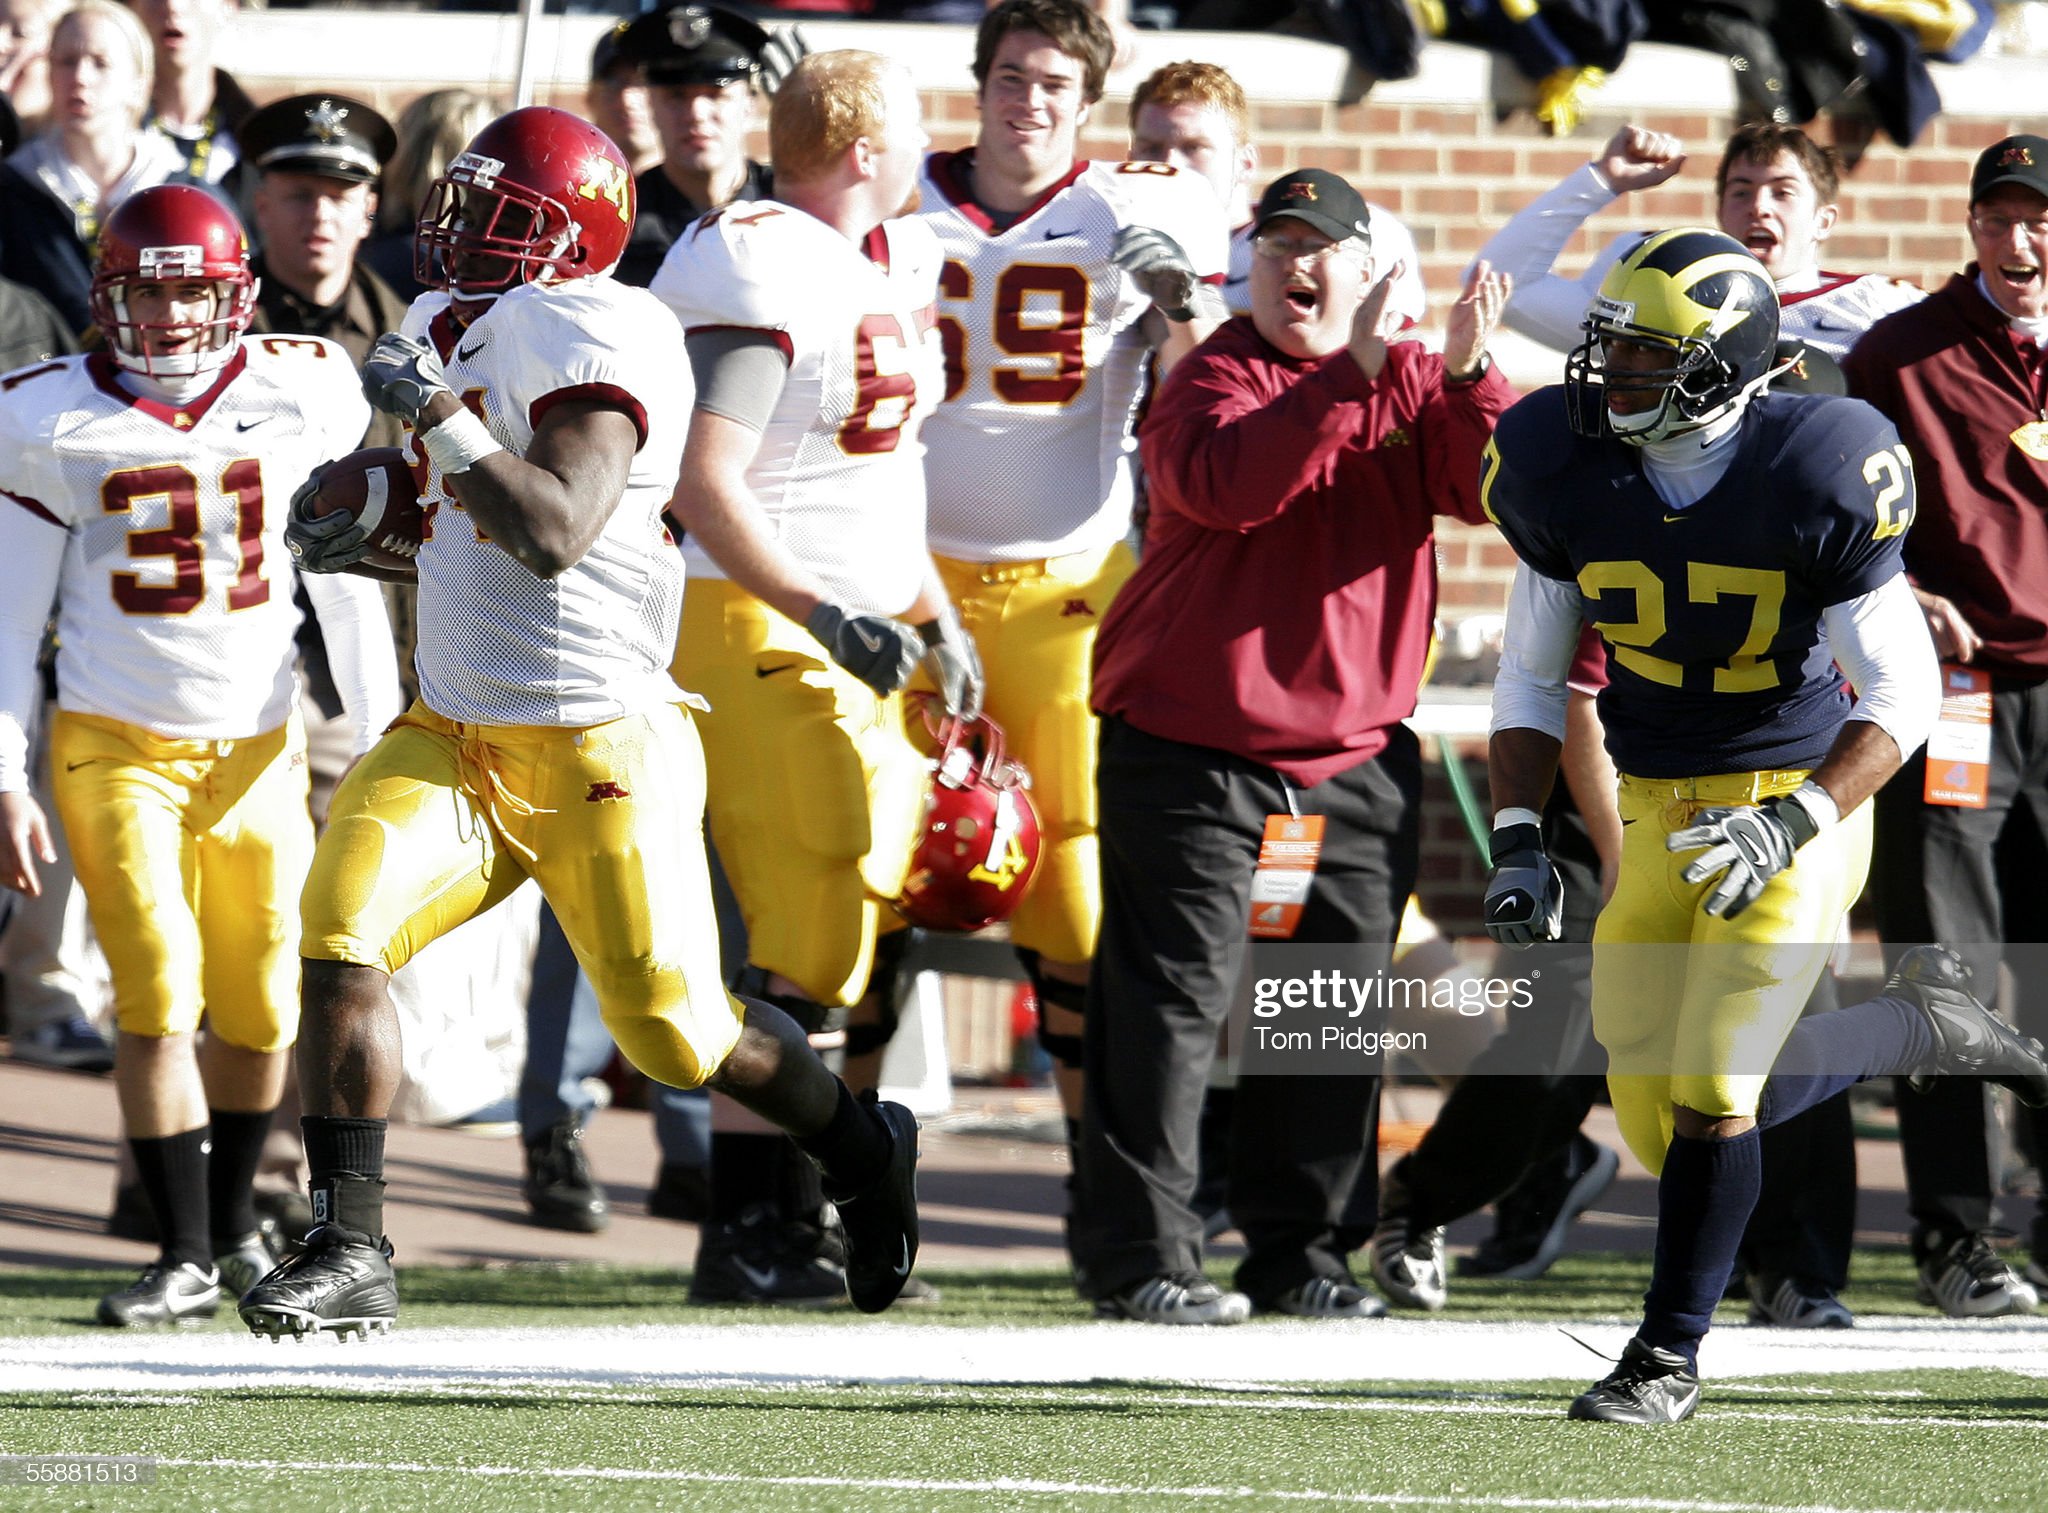 gary-russell-of-minnesota-rushes-for-61-yards-deep-into-michigan-in-picture-id55881513